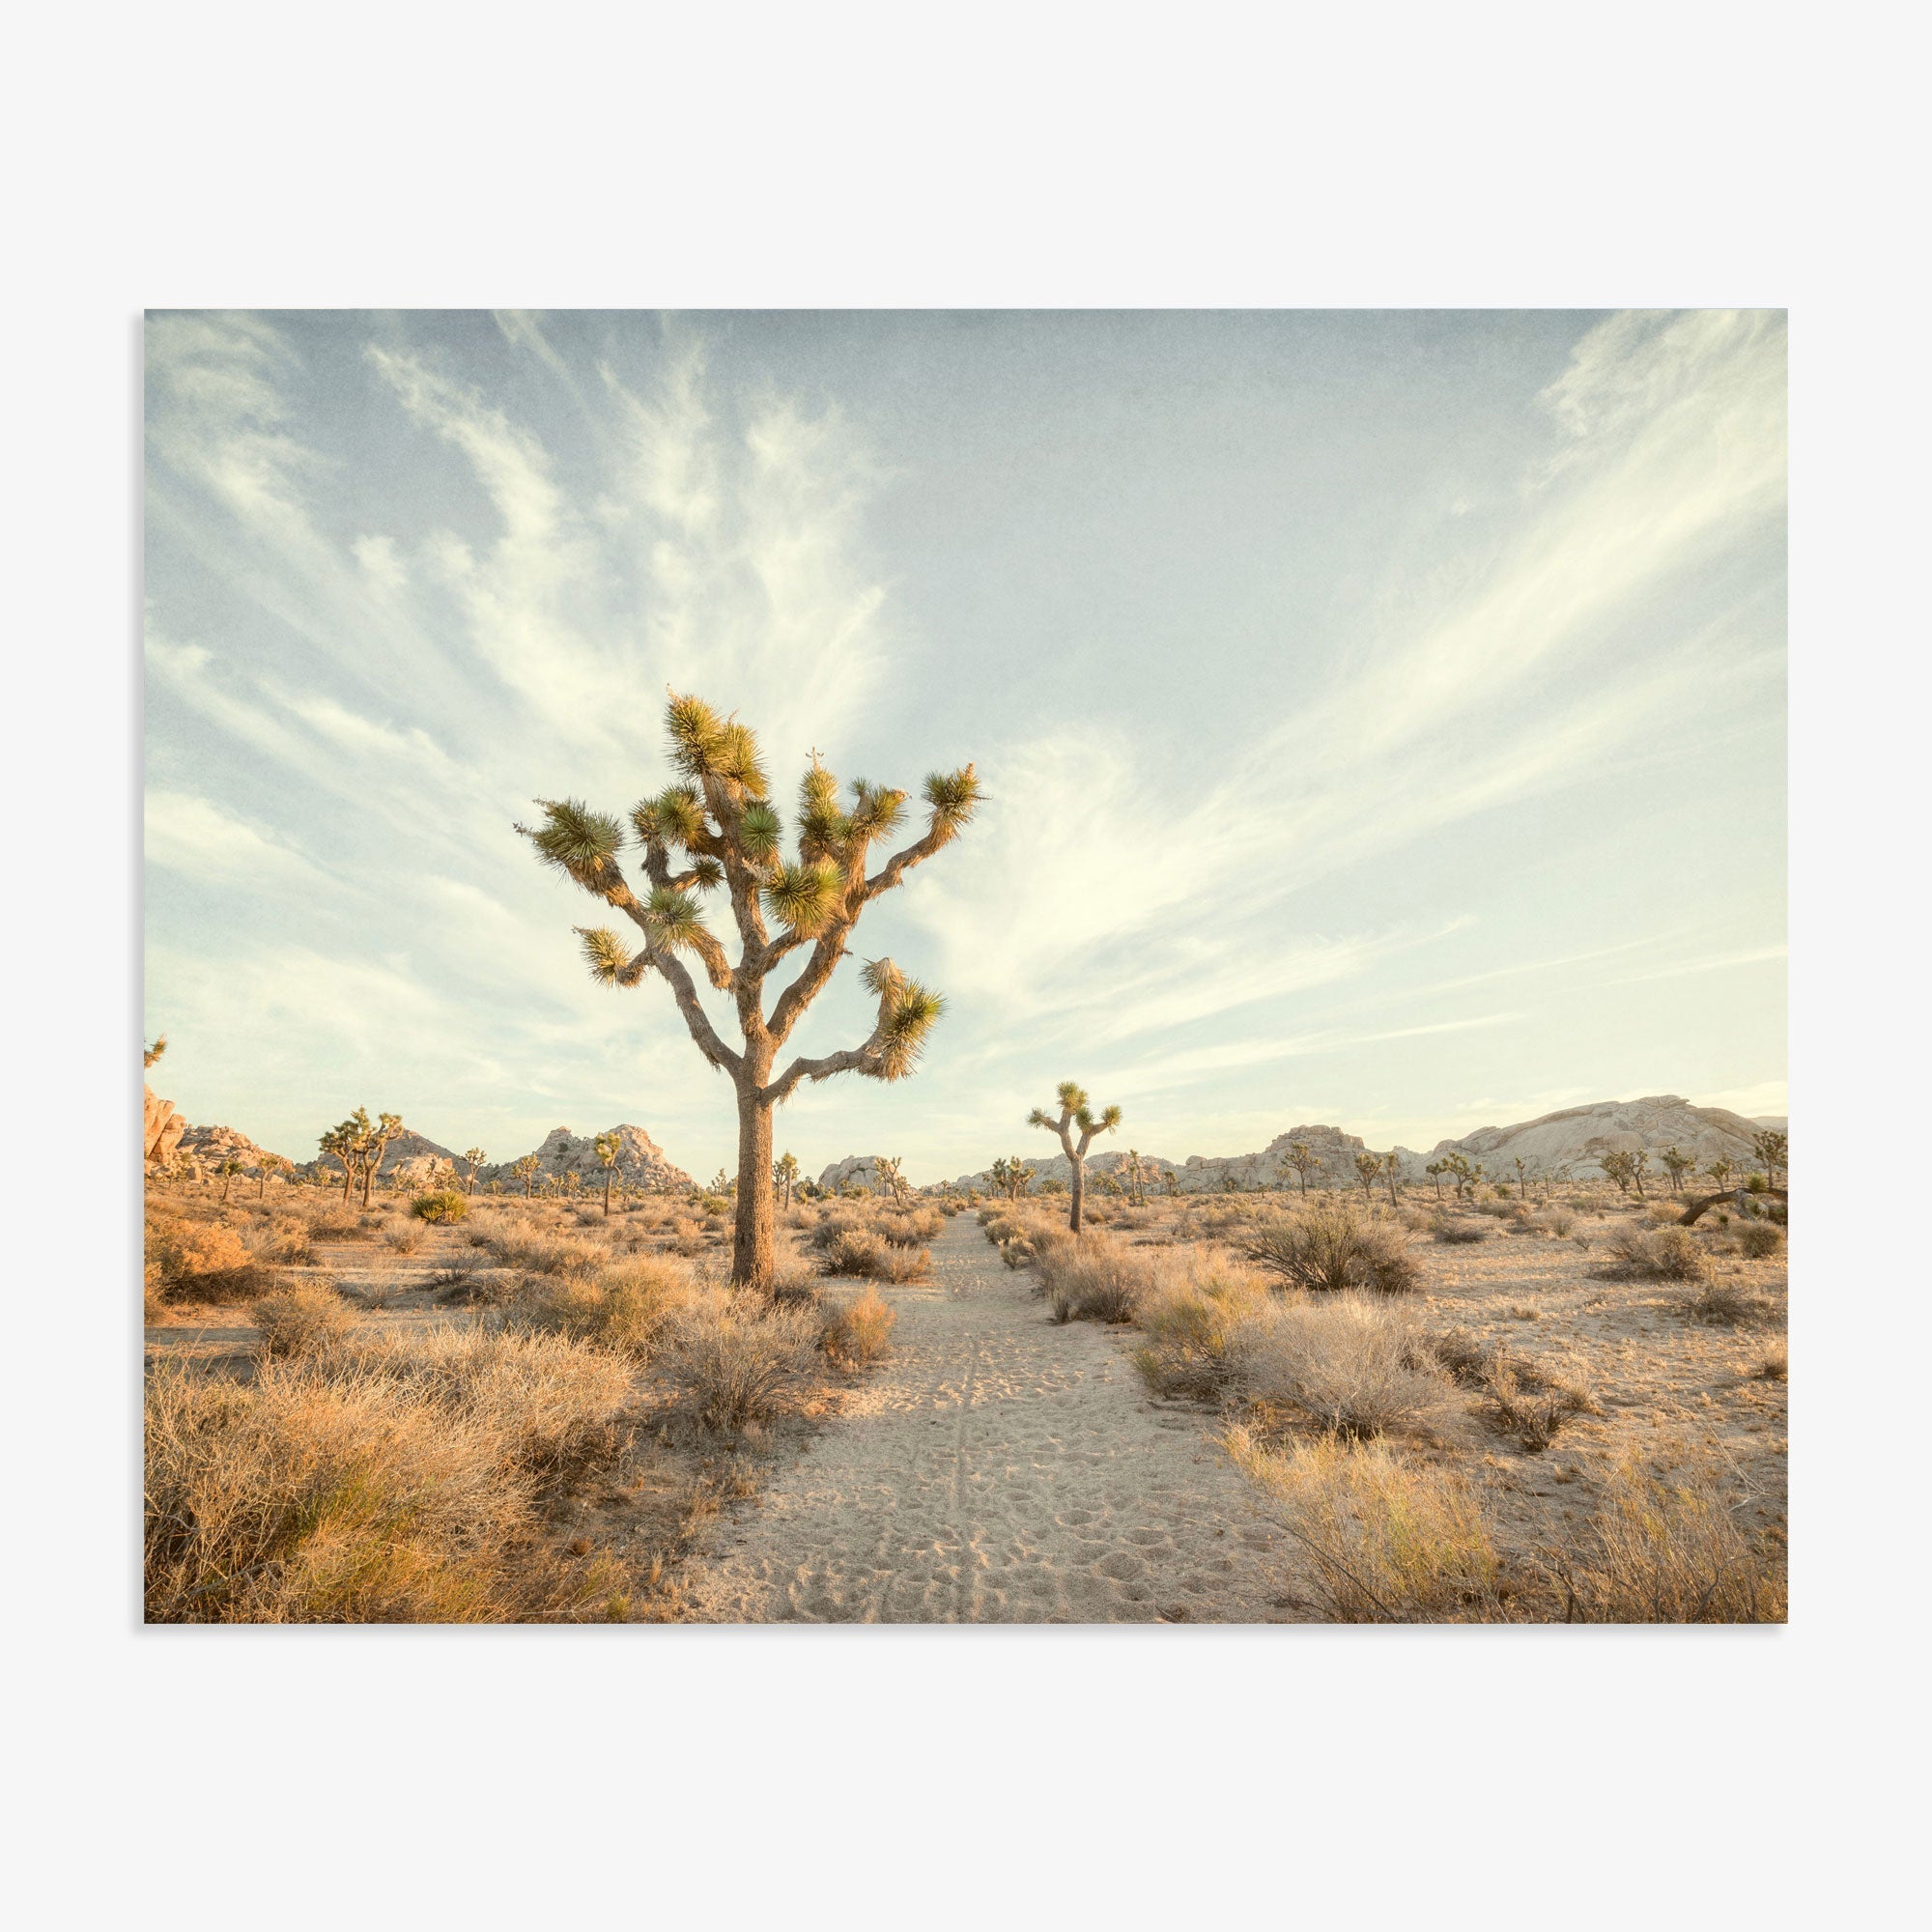 A desert landscape featuring a lone Joshua Tree Print, &#39;Path to Joshua&#39; in the foreground, surrounded by dry scrub and rocky formations under a clear sky, located near Palm Springs. (Brand: Offley Green)